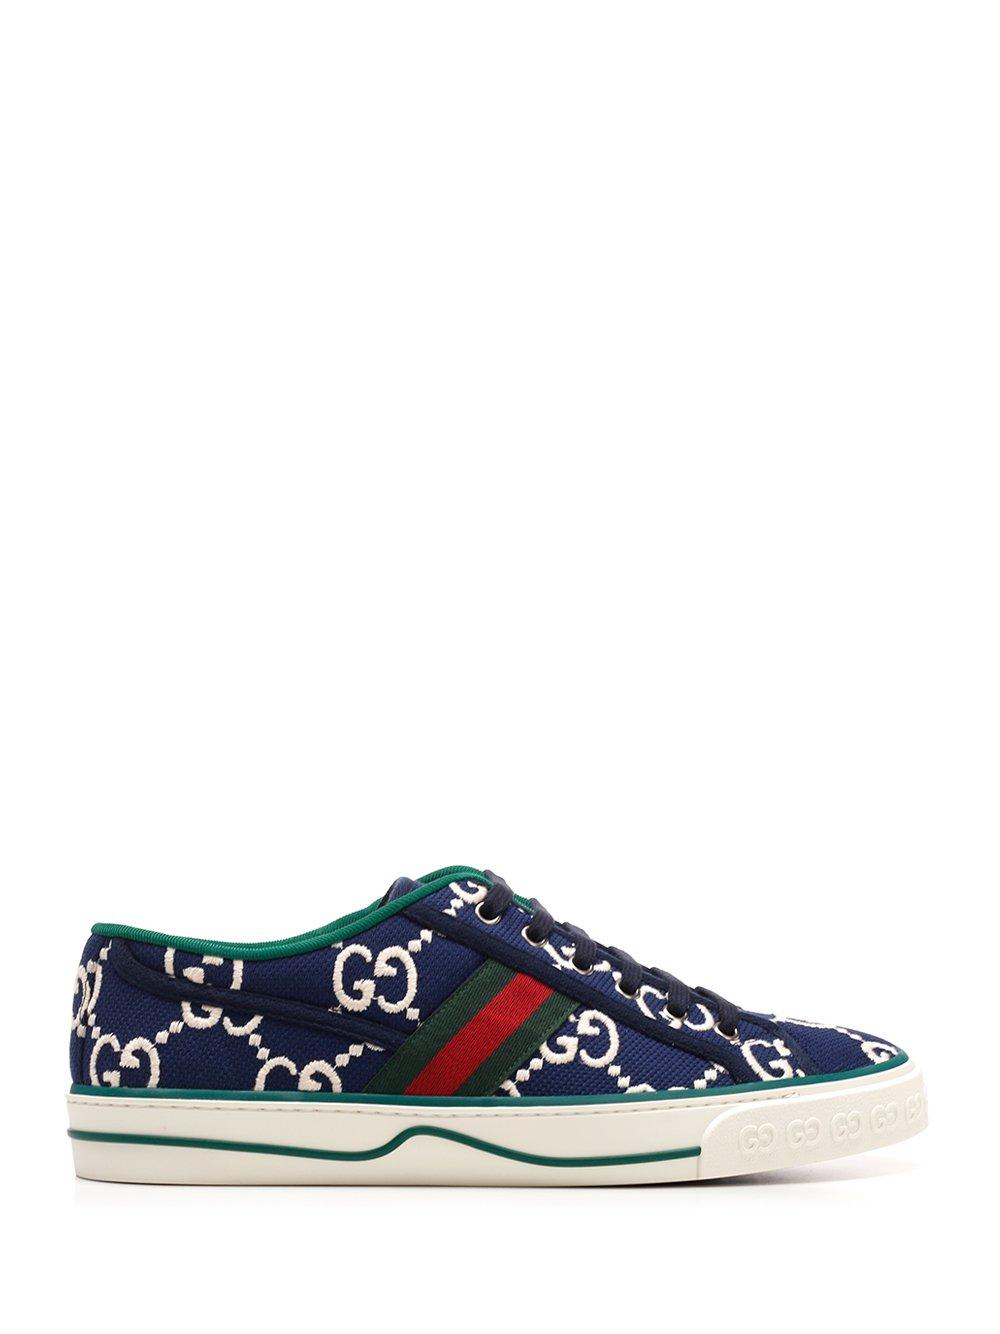 Gucci Tennis 1977 Embroidered Logo Sneaker in Blue/White (Blue) for Men ...